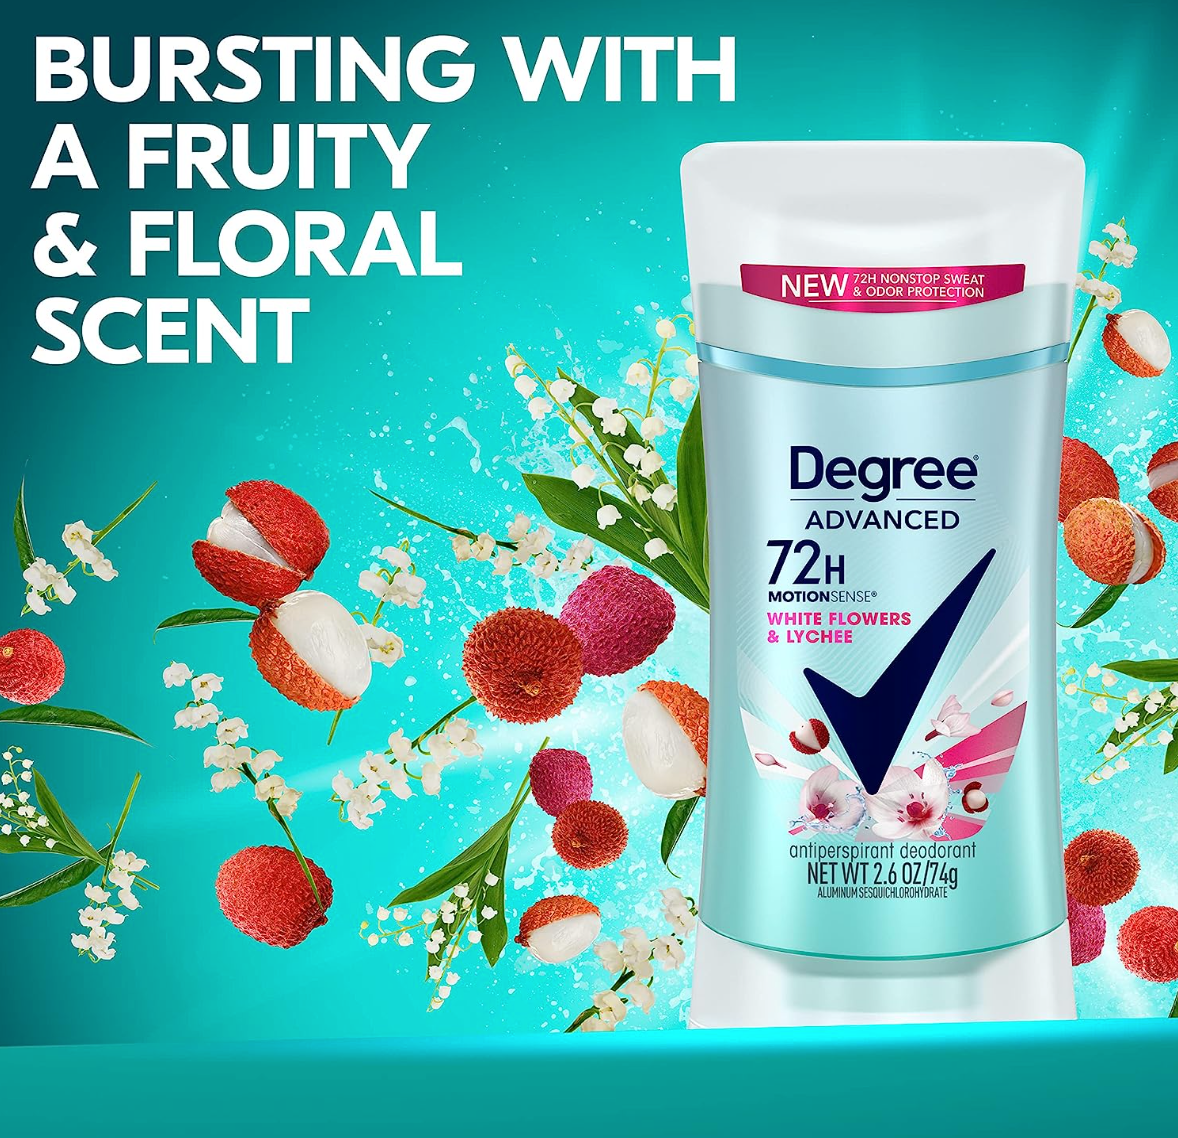 Degree Advanced Antiperspirant Deodorant 72-Hour Sweat & Odor Protection White Flowers & Lychee Antiperspirant for Women with MotionSense Technology 2.6 oz